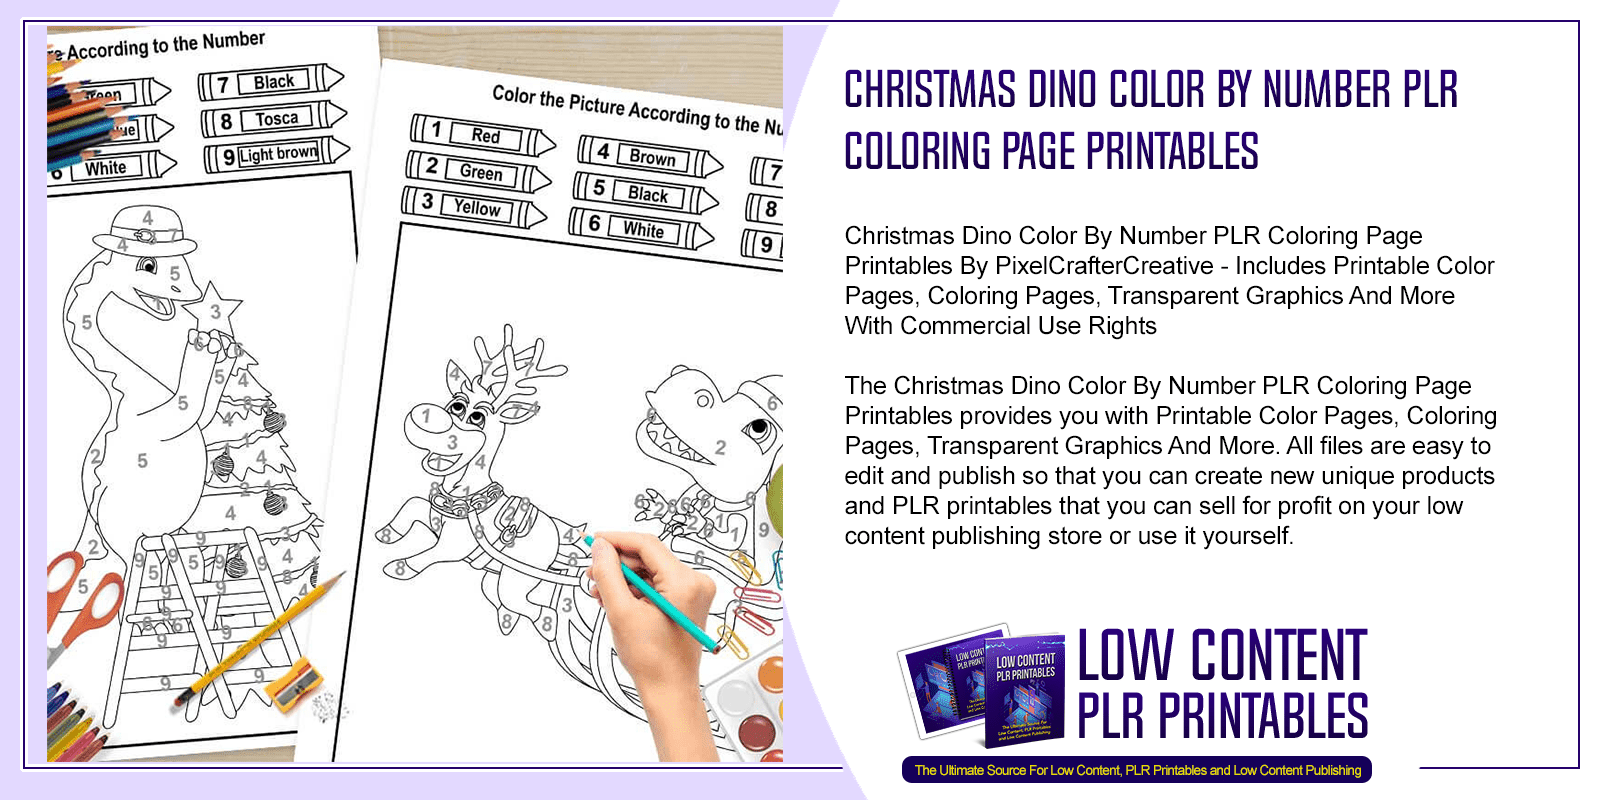 Christmas Dino Color By Number PLR Coloring Page Printables